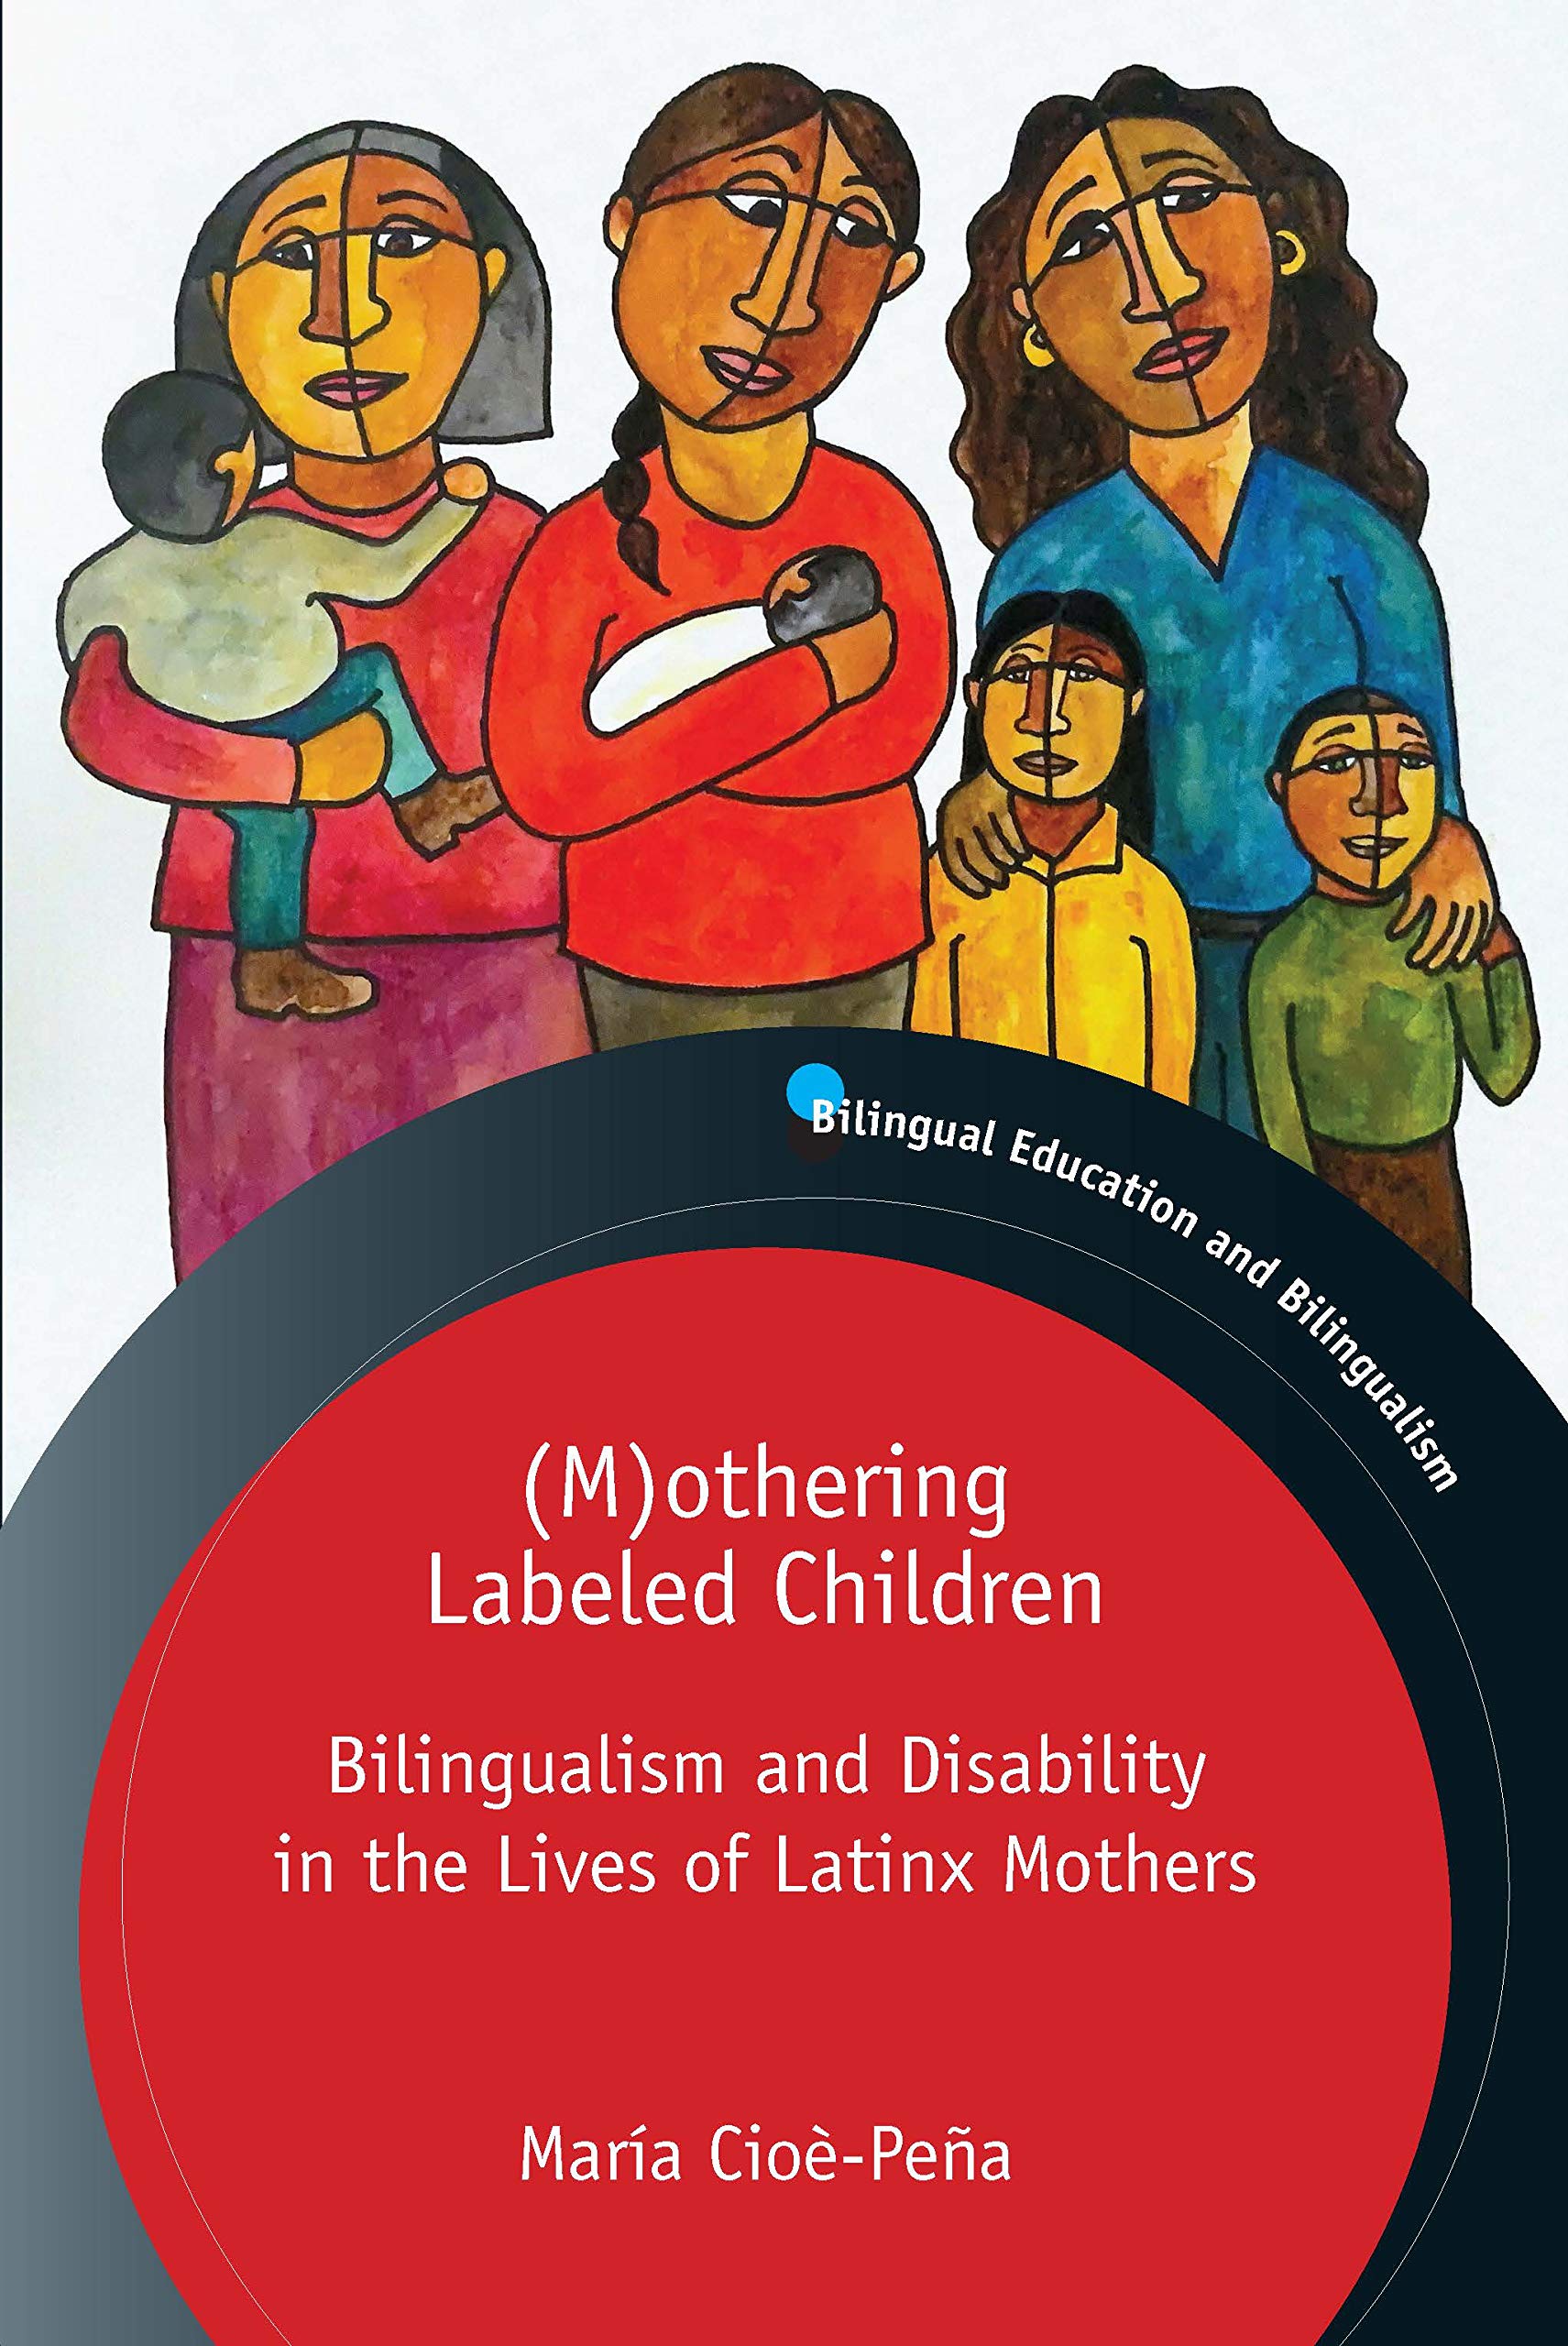 Book Cover (M)othering Labeled Children: Bilingualism and Disability in the Lives of Latinx Mothers